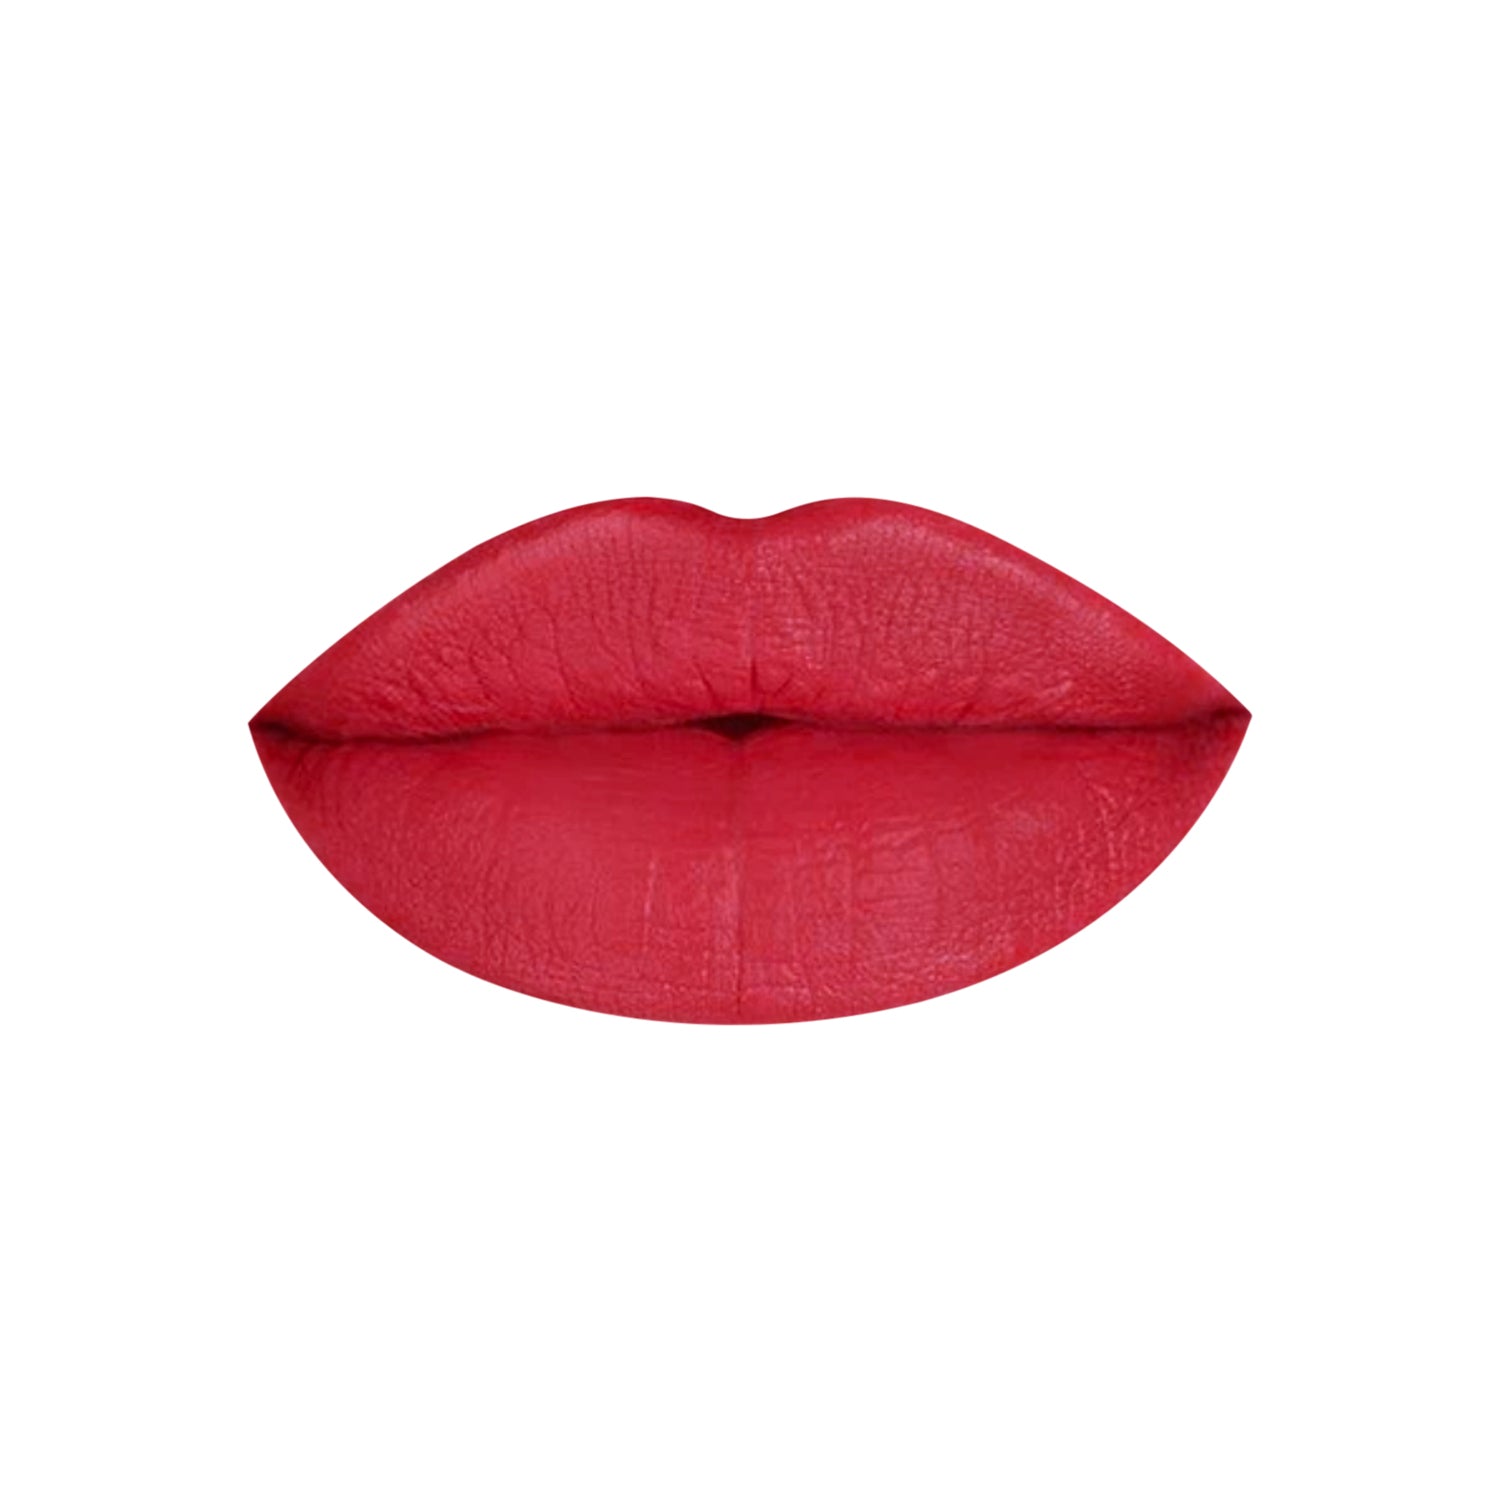 PAC Cosmetics Matte Addict #Size_4 ml+#Color_Red Me